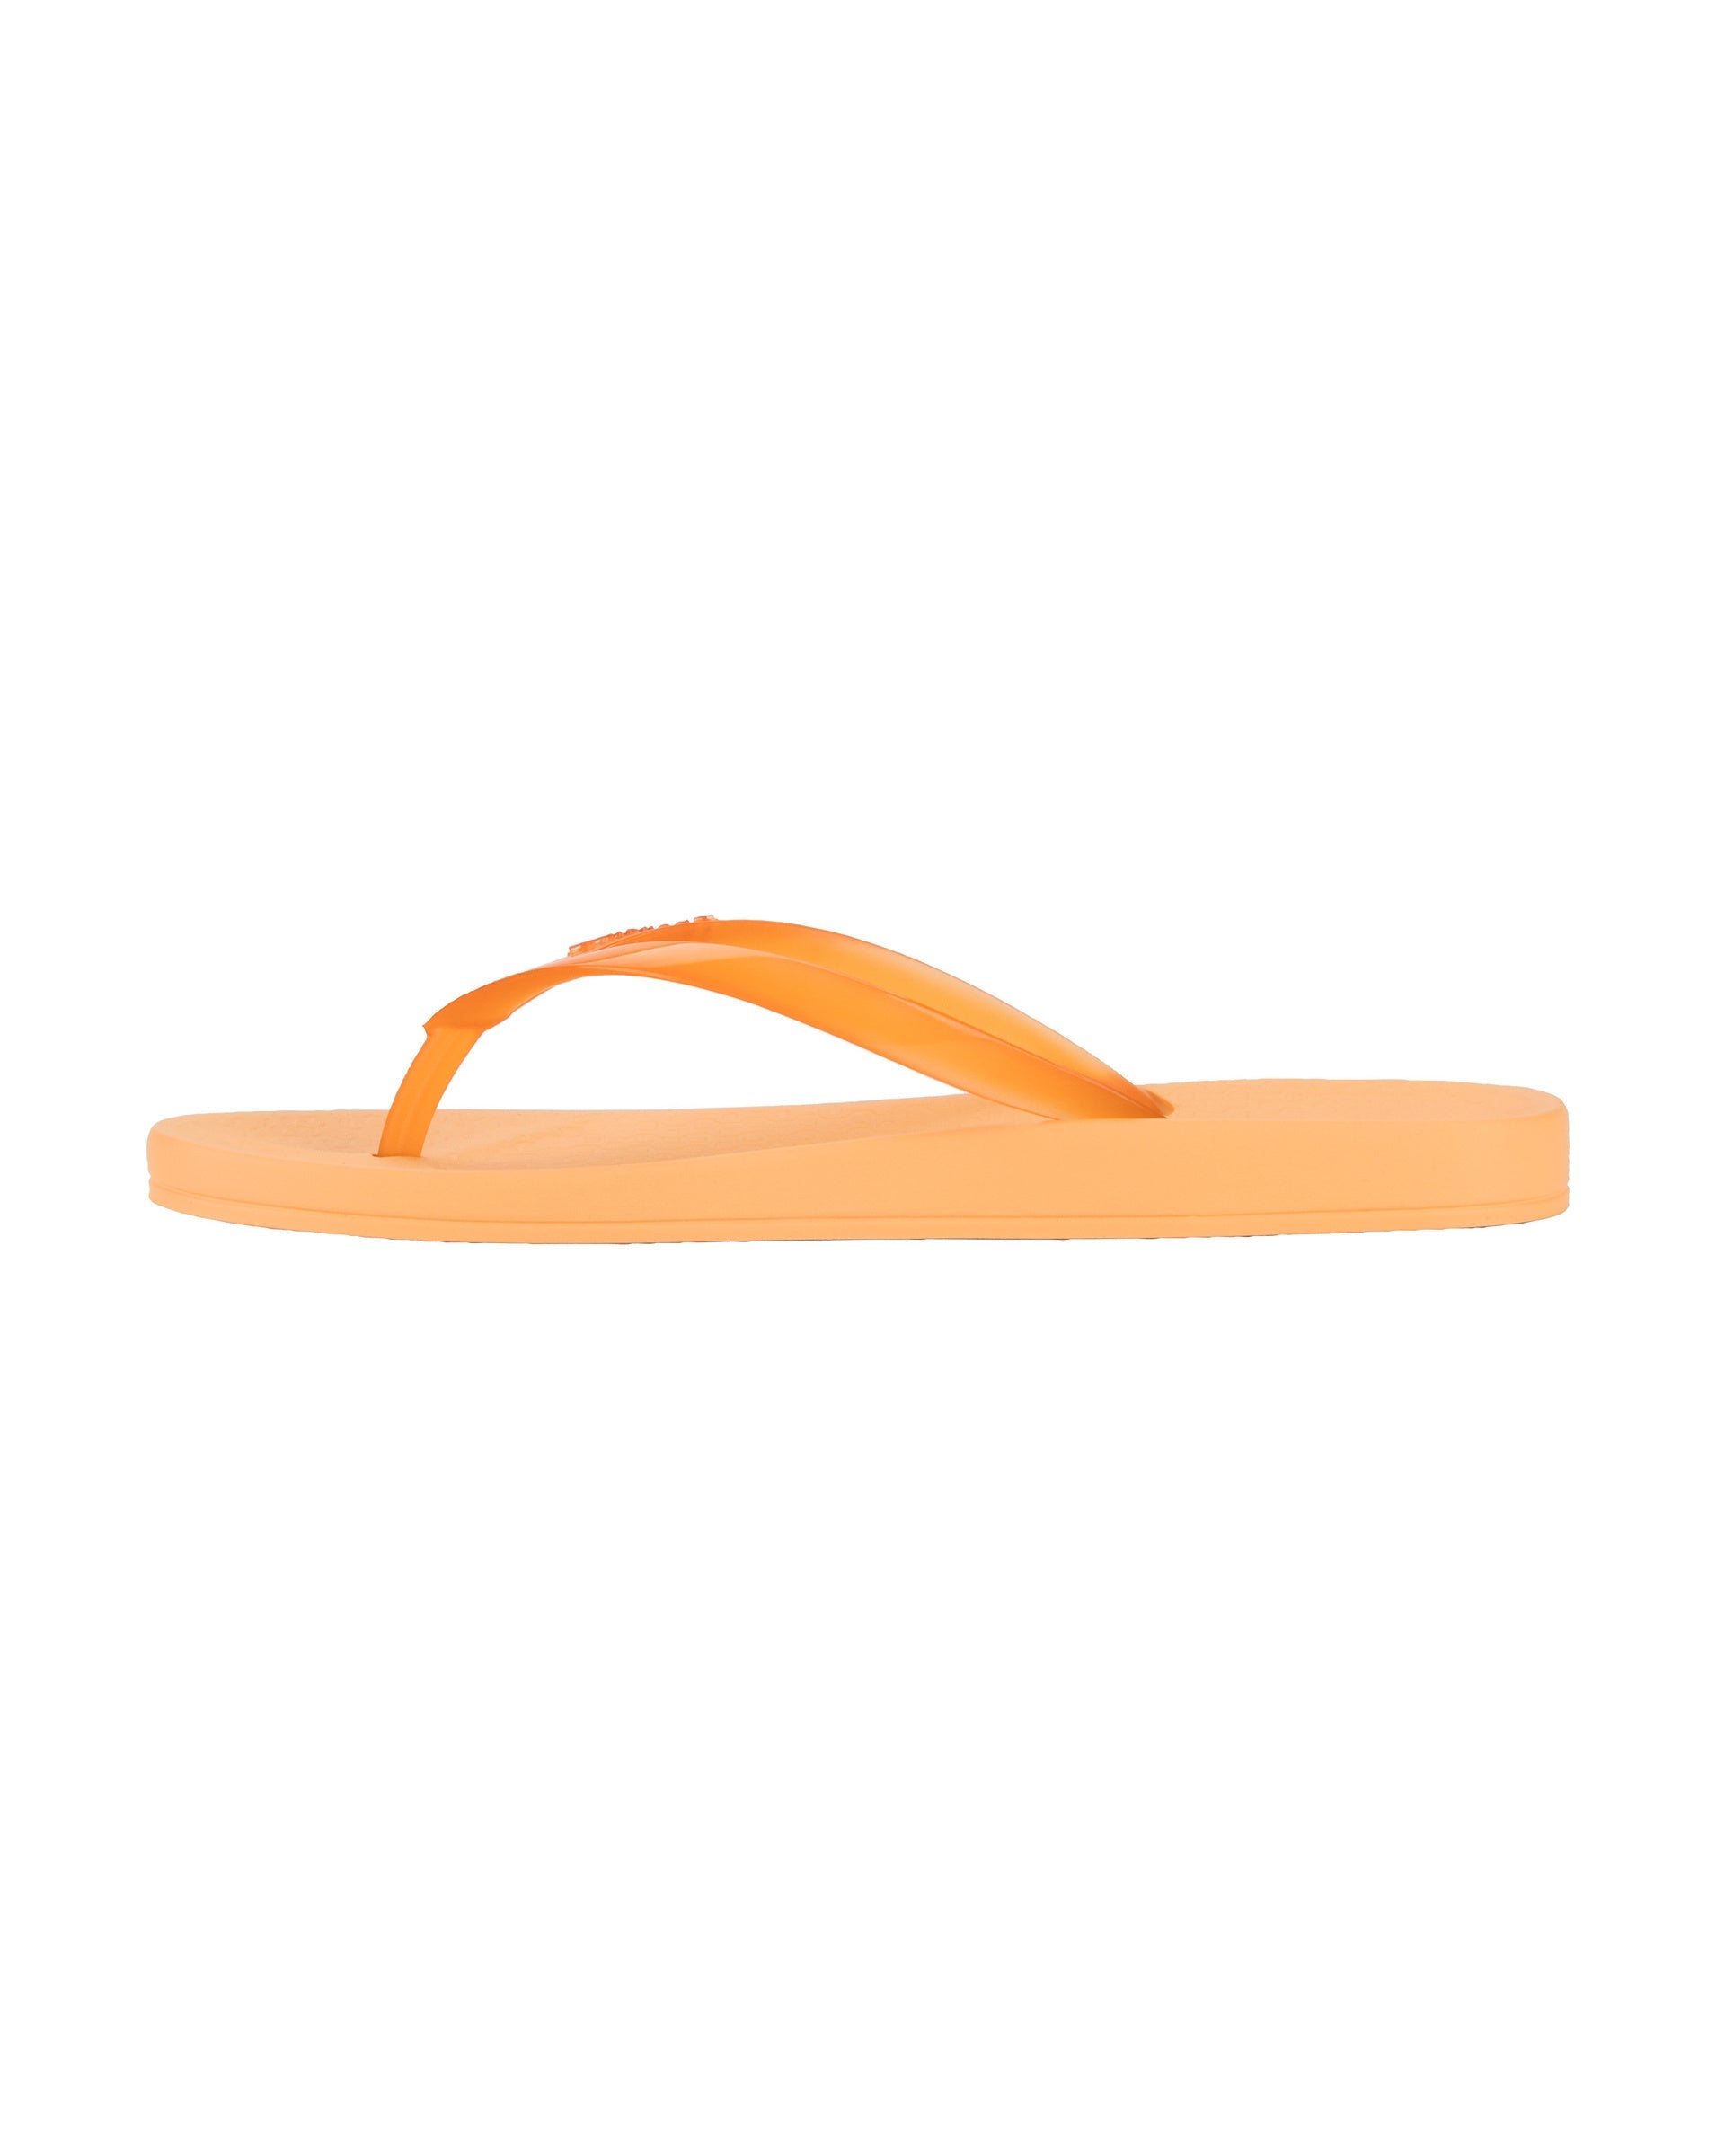 Inner side view of a orange Ipanema Ana Connect women's flip flop with a clear orange strap.